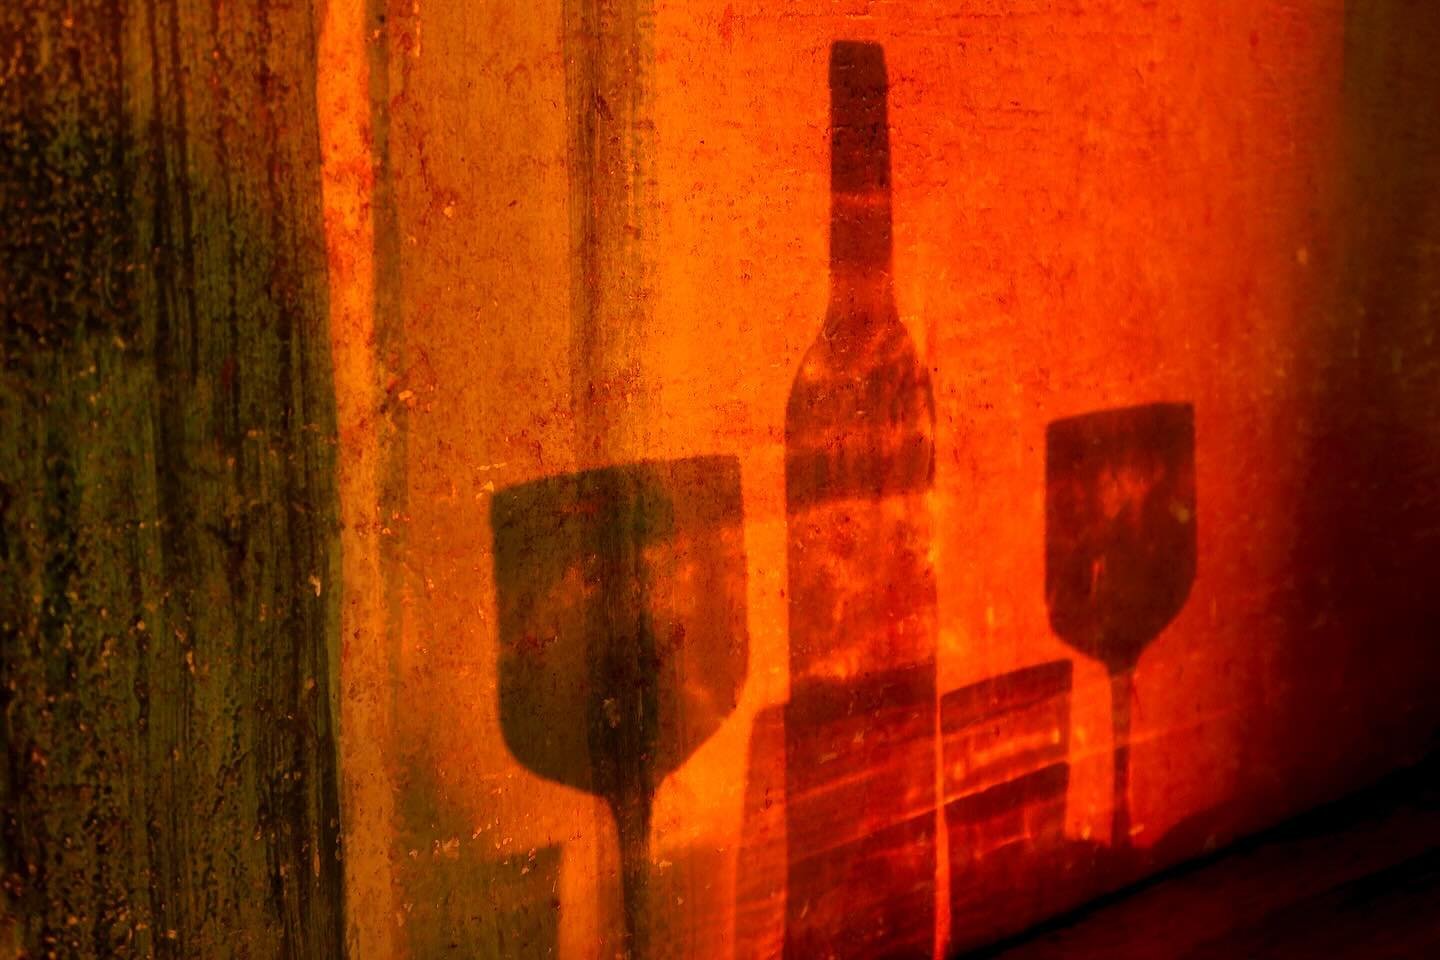 From our &quot;Colorscapes&quot; Exhibit gallery, &quot;Wine Bottle Sunset Nosara&quot; by Geoff Weiser. Congratulations to the winners and all the photographers whose work we&rsquo;re honored to include in this show!

#fineartphotography #color #col